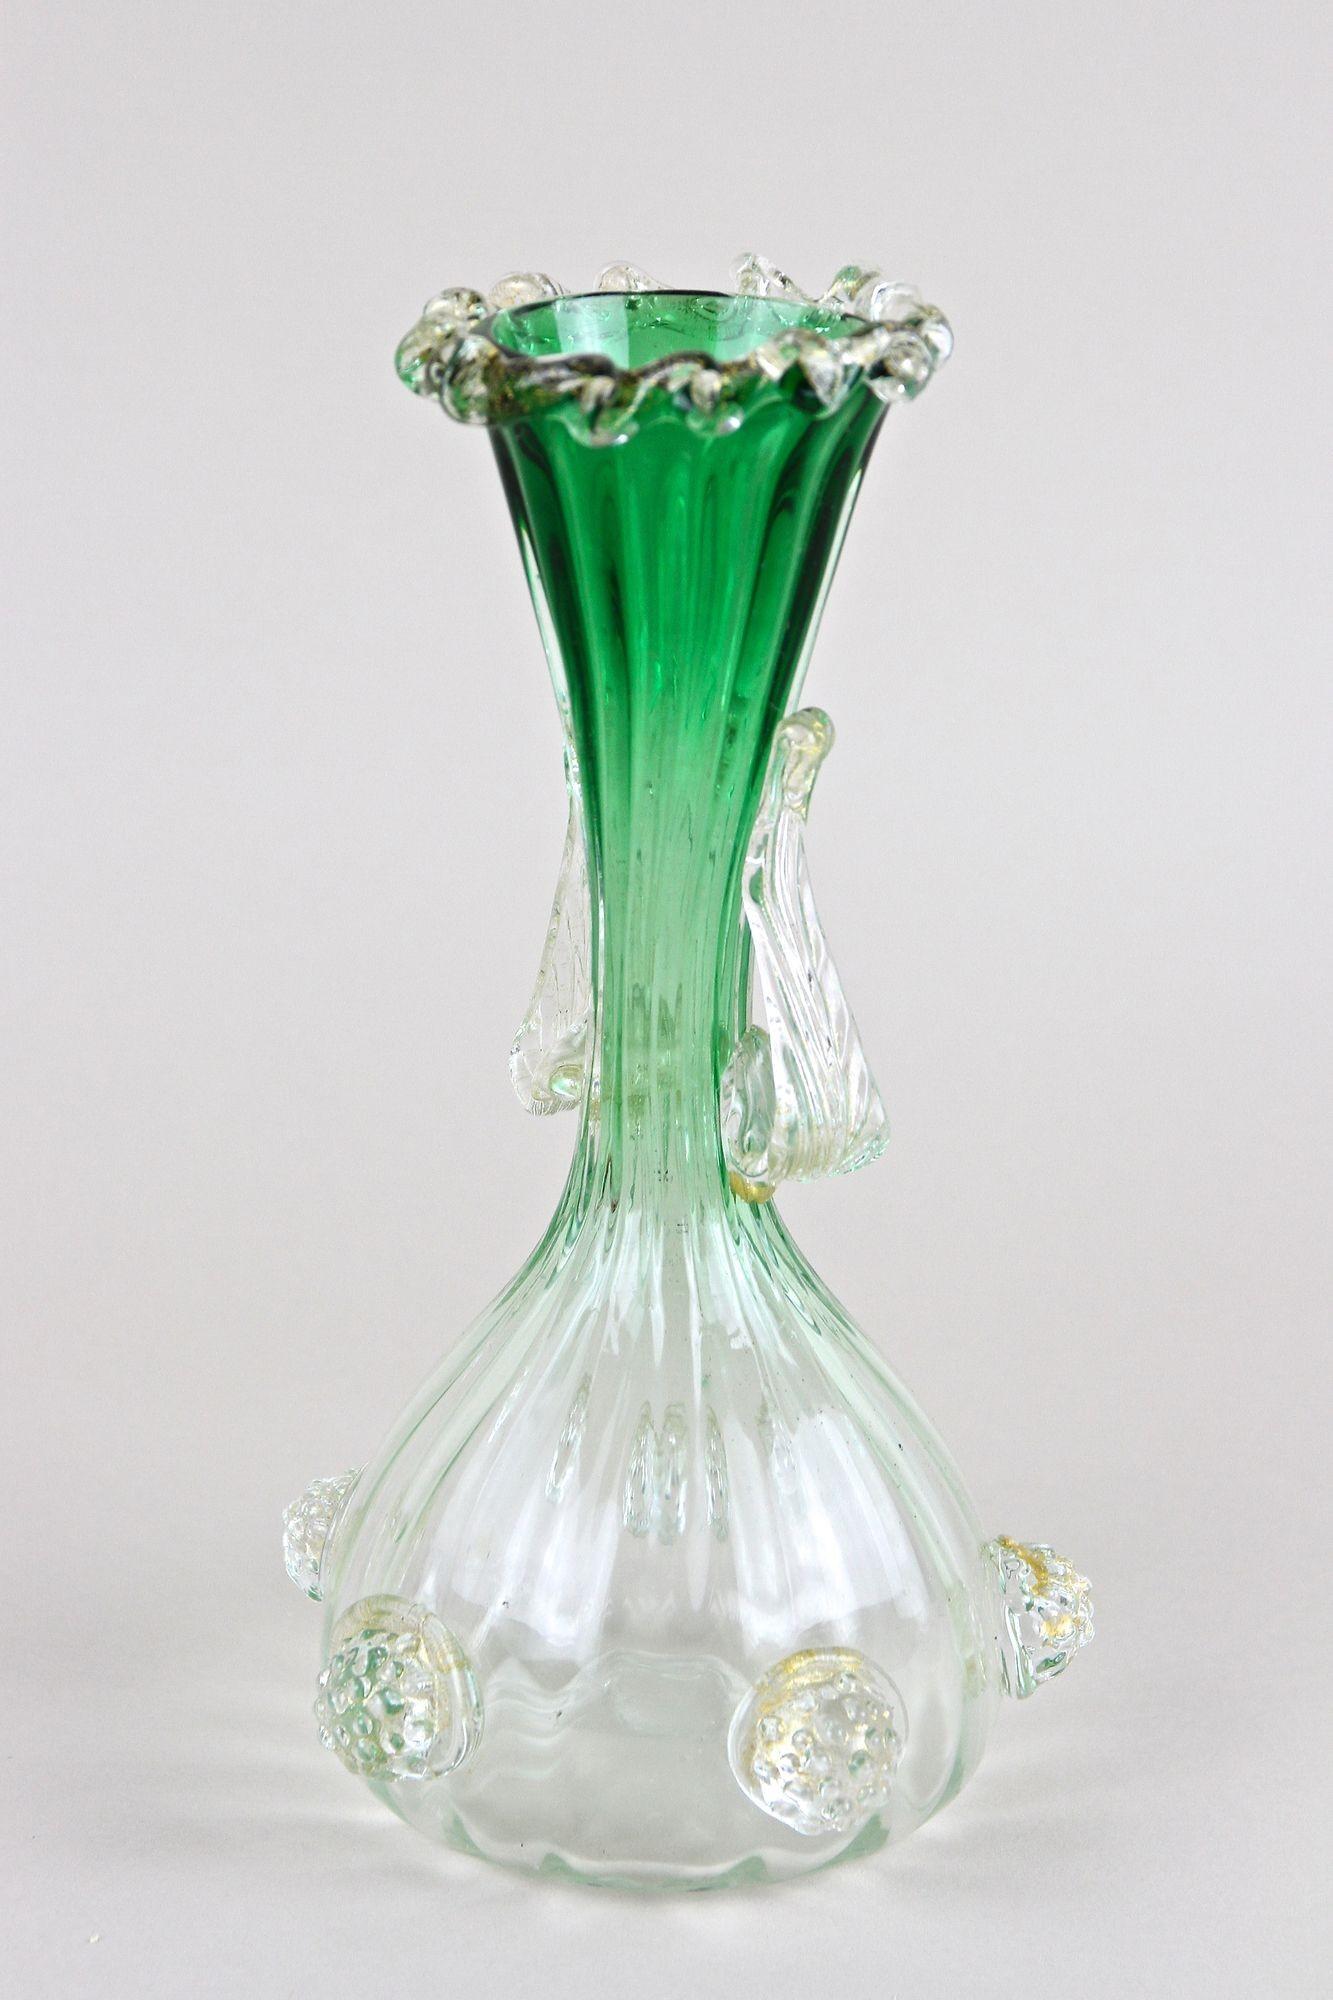 Green/ White Murano Glass Vase With 24k Gold Flakes by Fratelli Toso, IT ca 1930 For Sale 1